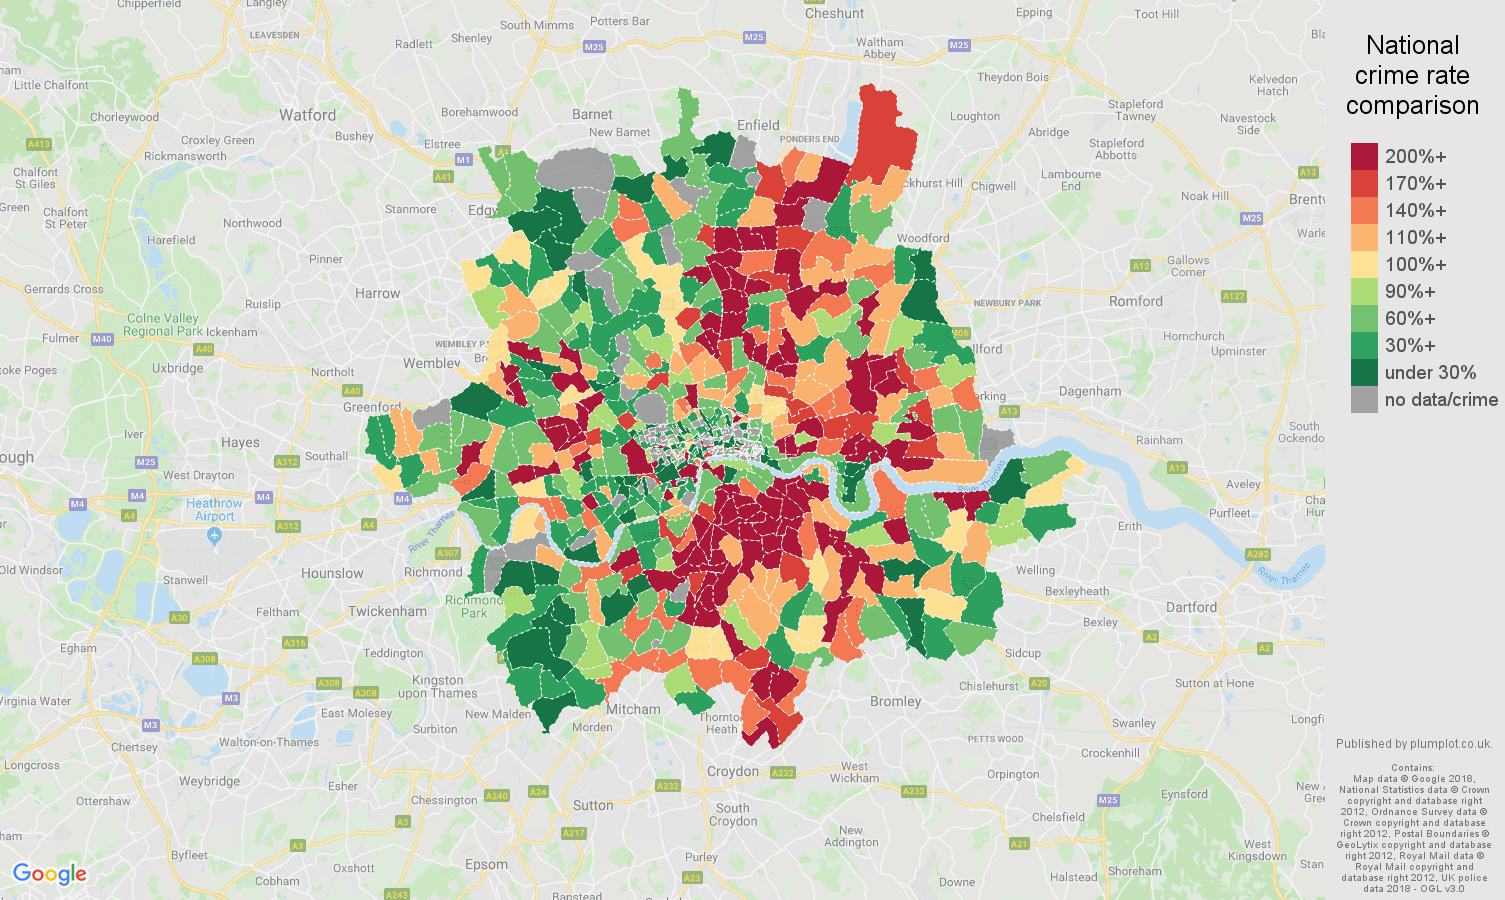 Inner London possession of weapons crime rate comparison map